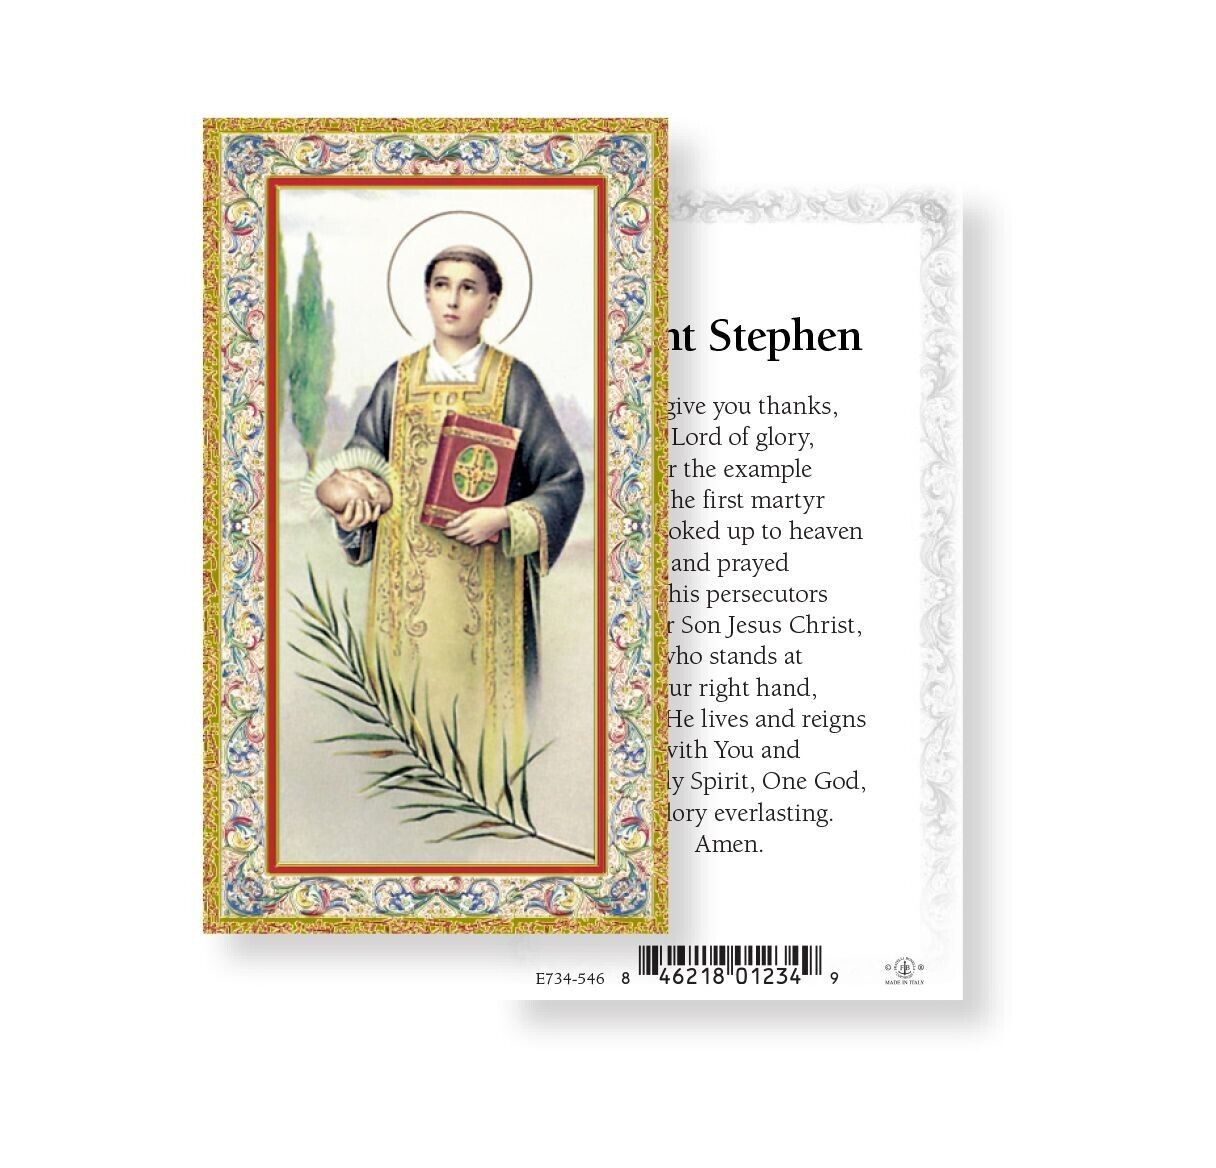 Saint St. Stephen with Prayer - gold trim- Paperstock Holy Card